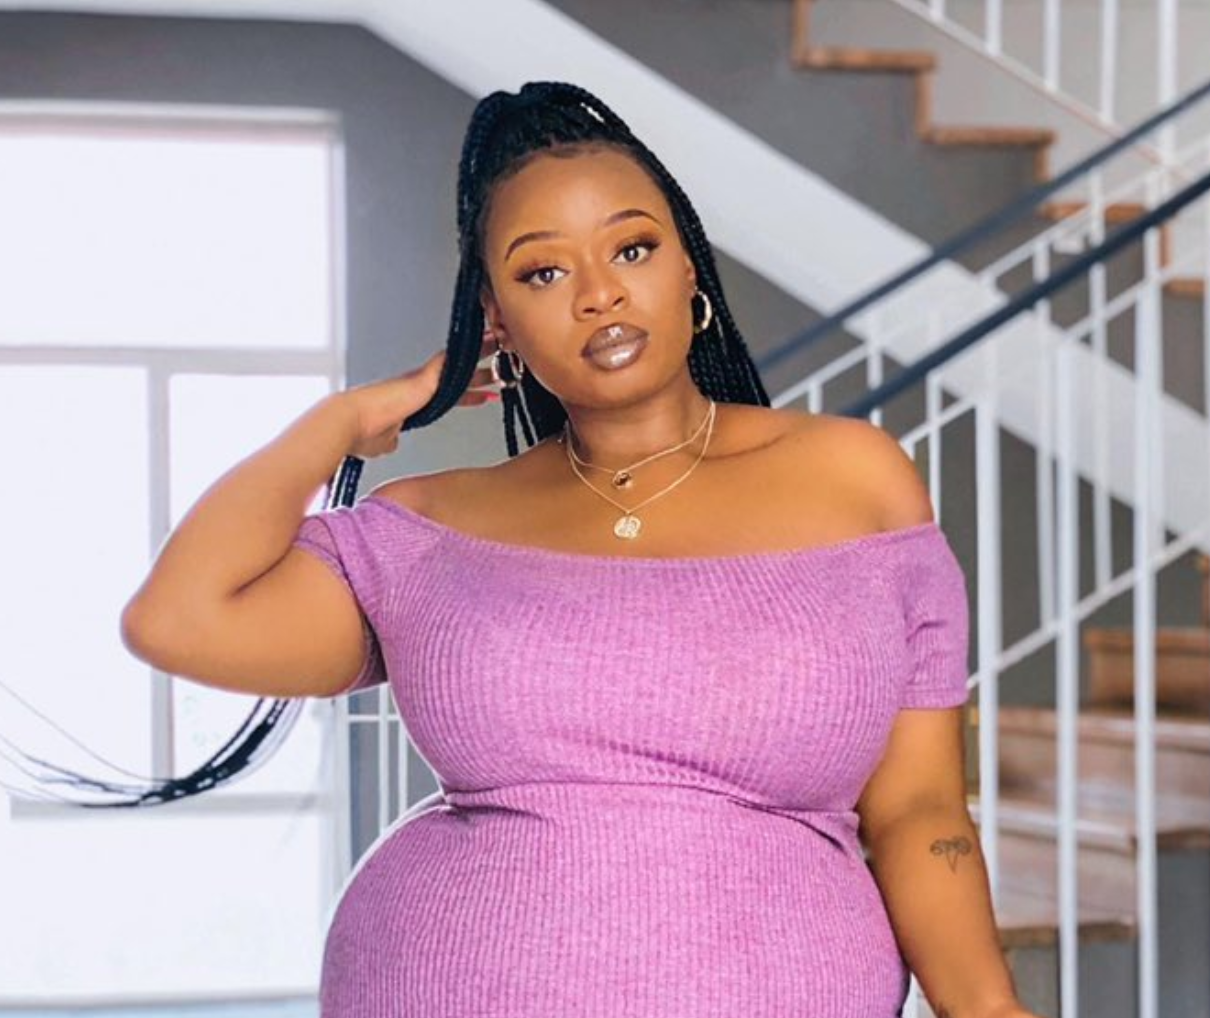 Thickleeyonce Reveals The Kind Of Man She Wants To Be With